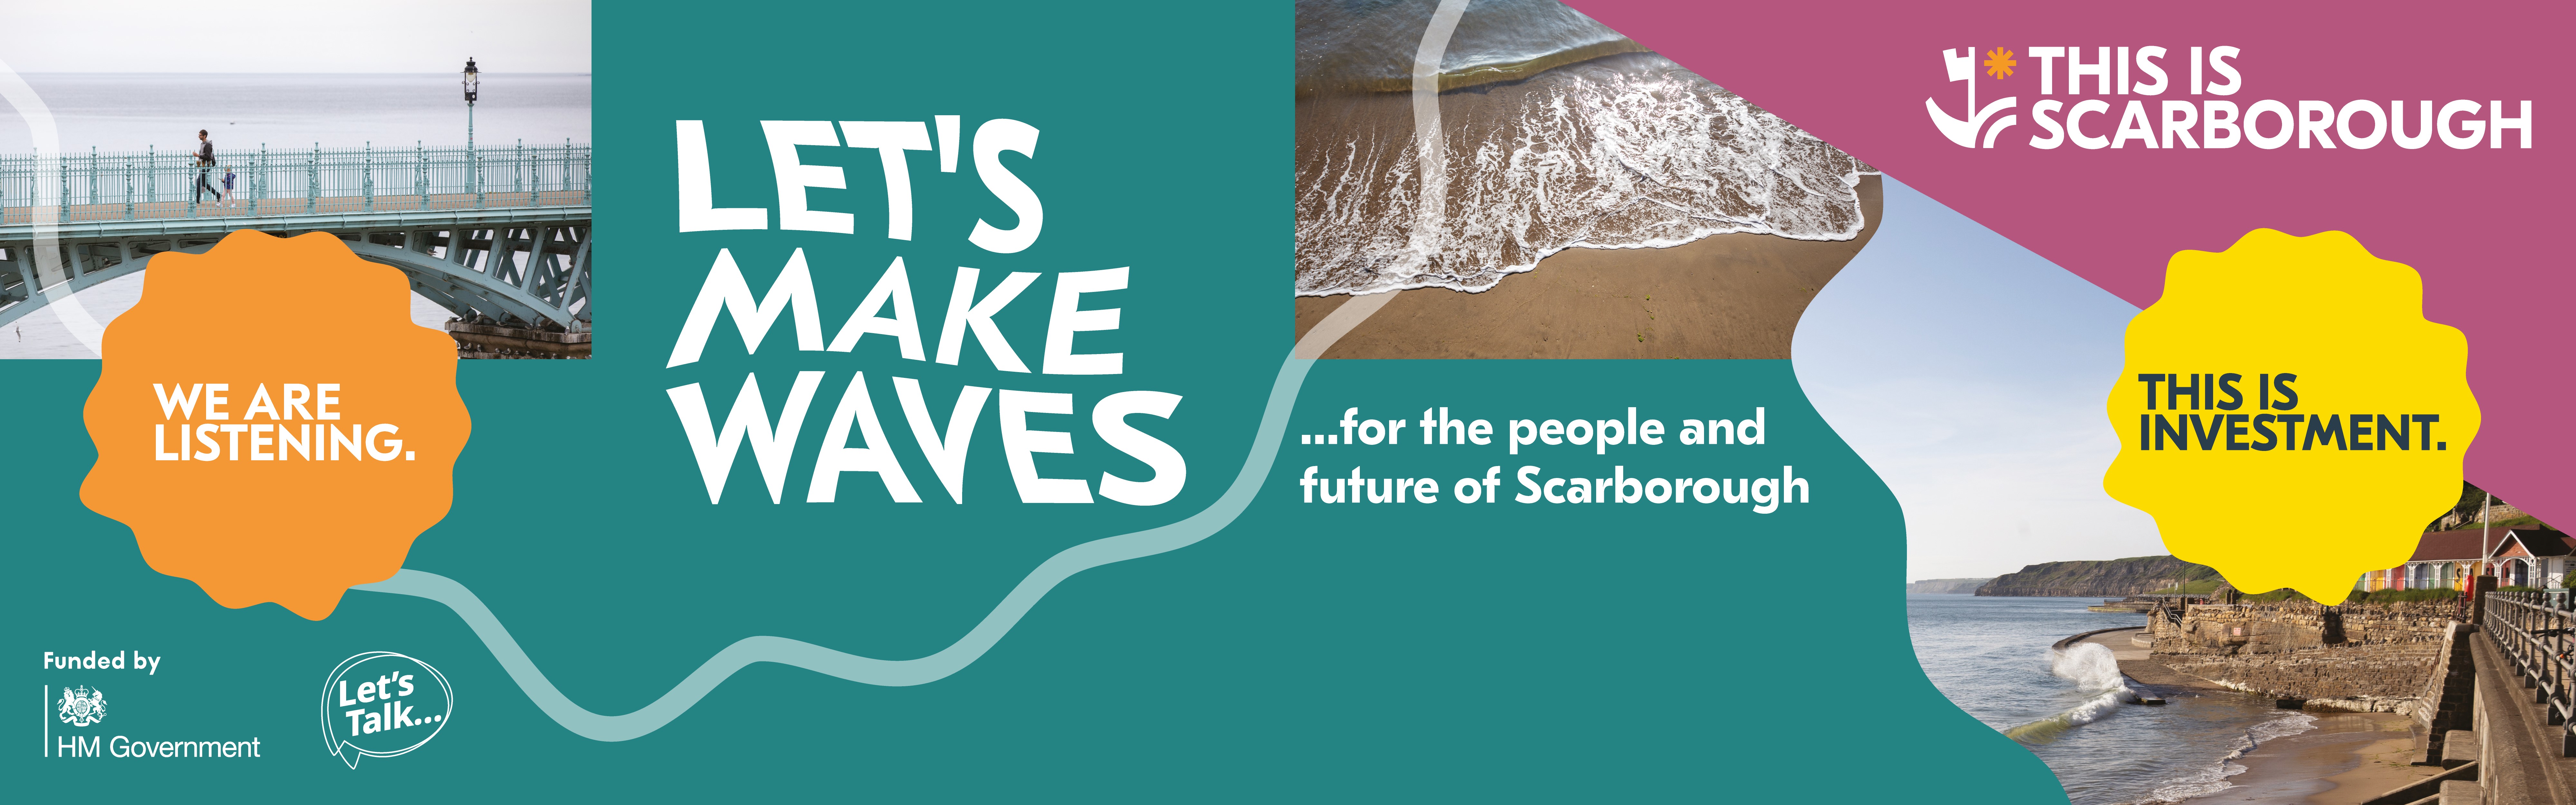 Let's make waves for the people and the future of Scarborough.